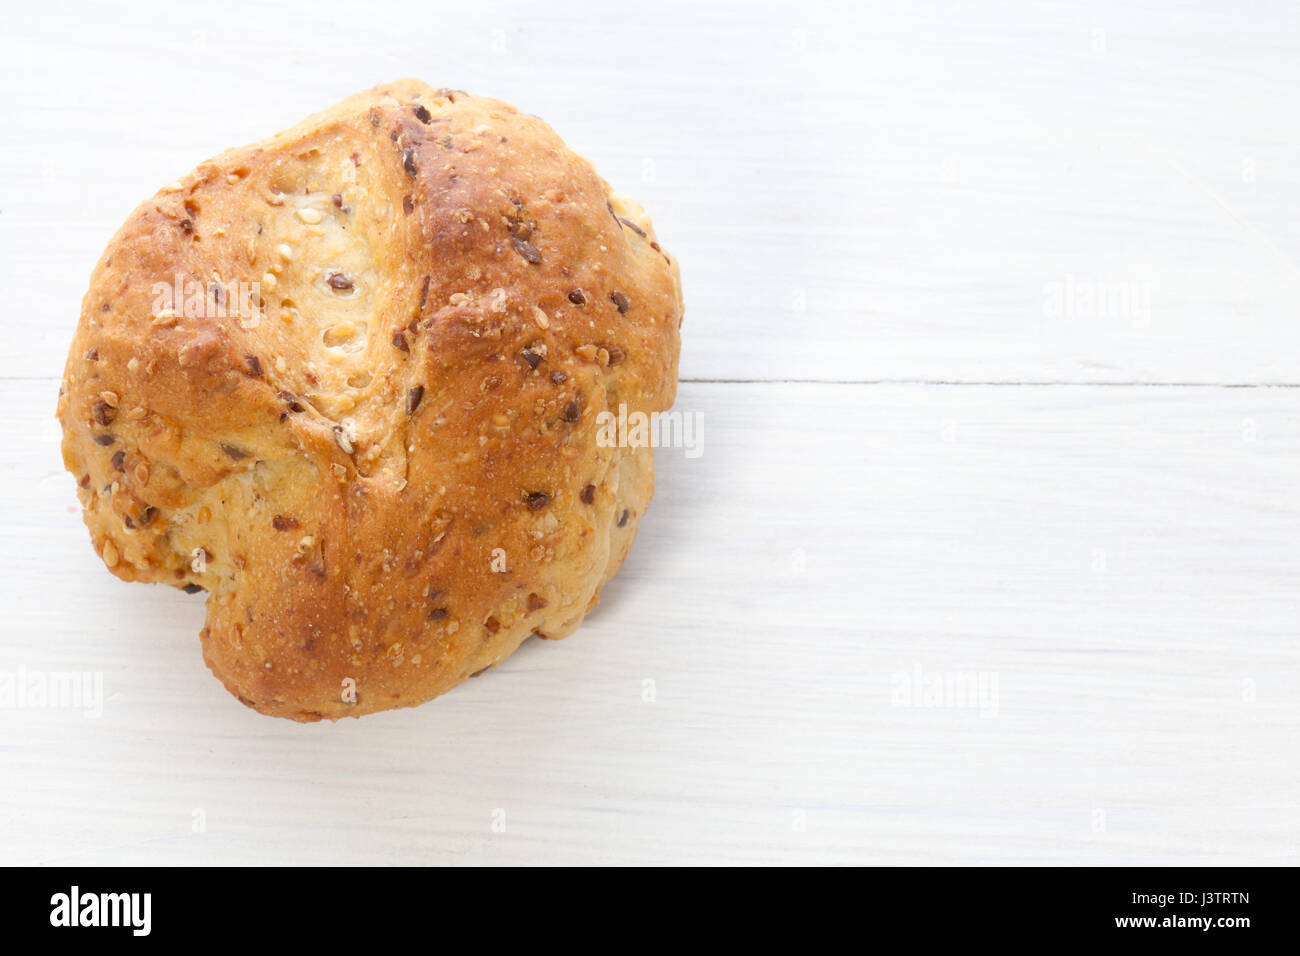 Single cereal bread bun on white wood table. Stock Photo